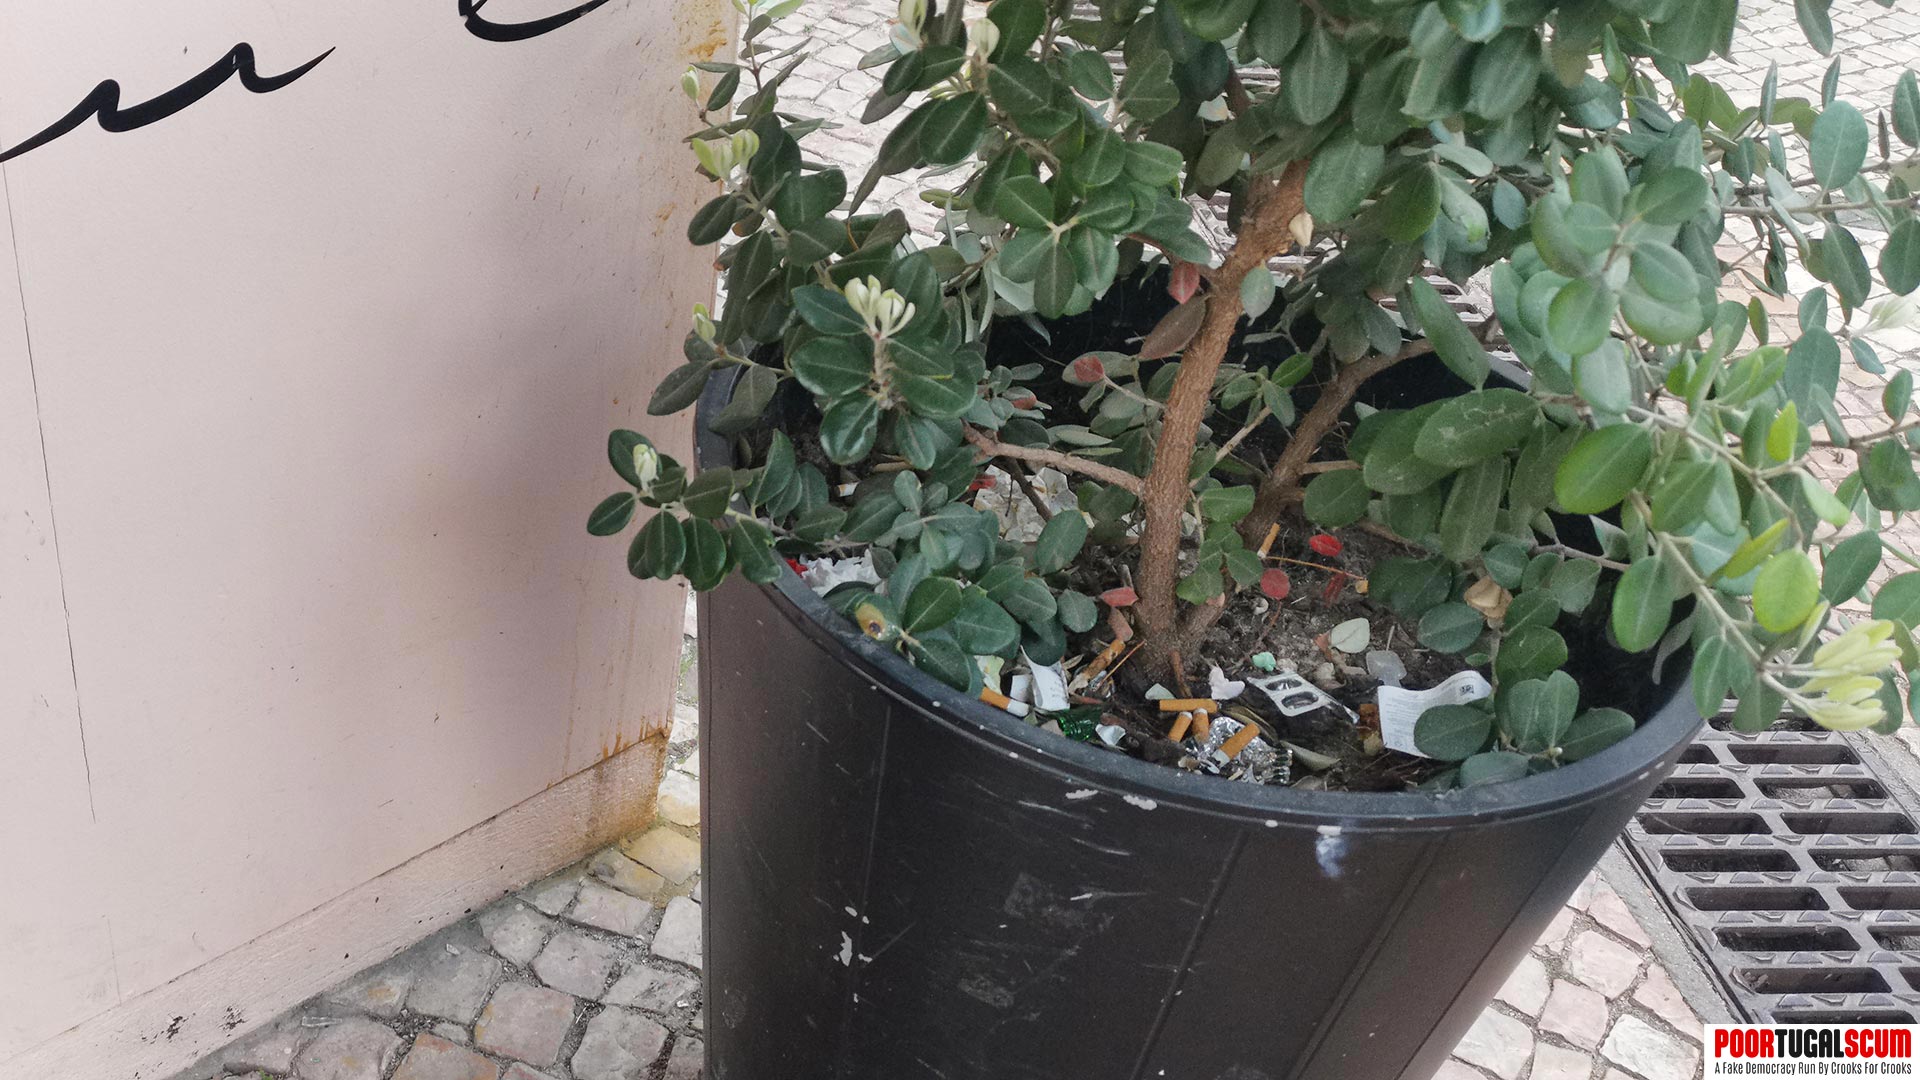 Potted plant full of cigarette butts at the entrance to a cafe in Portugal